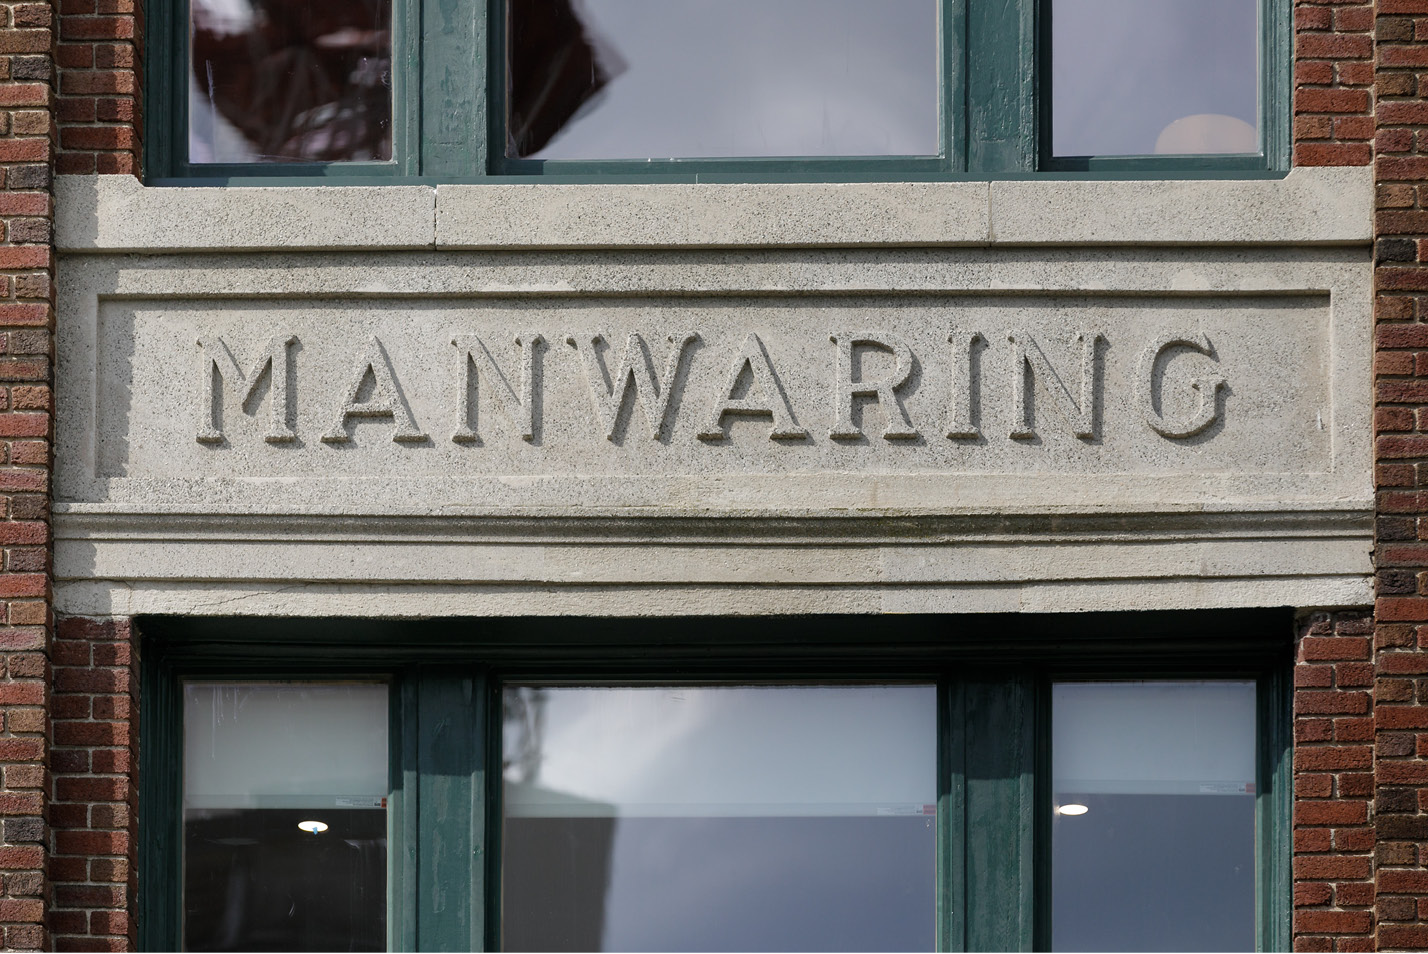 The Manwaring sign on the building